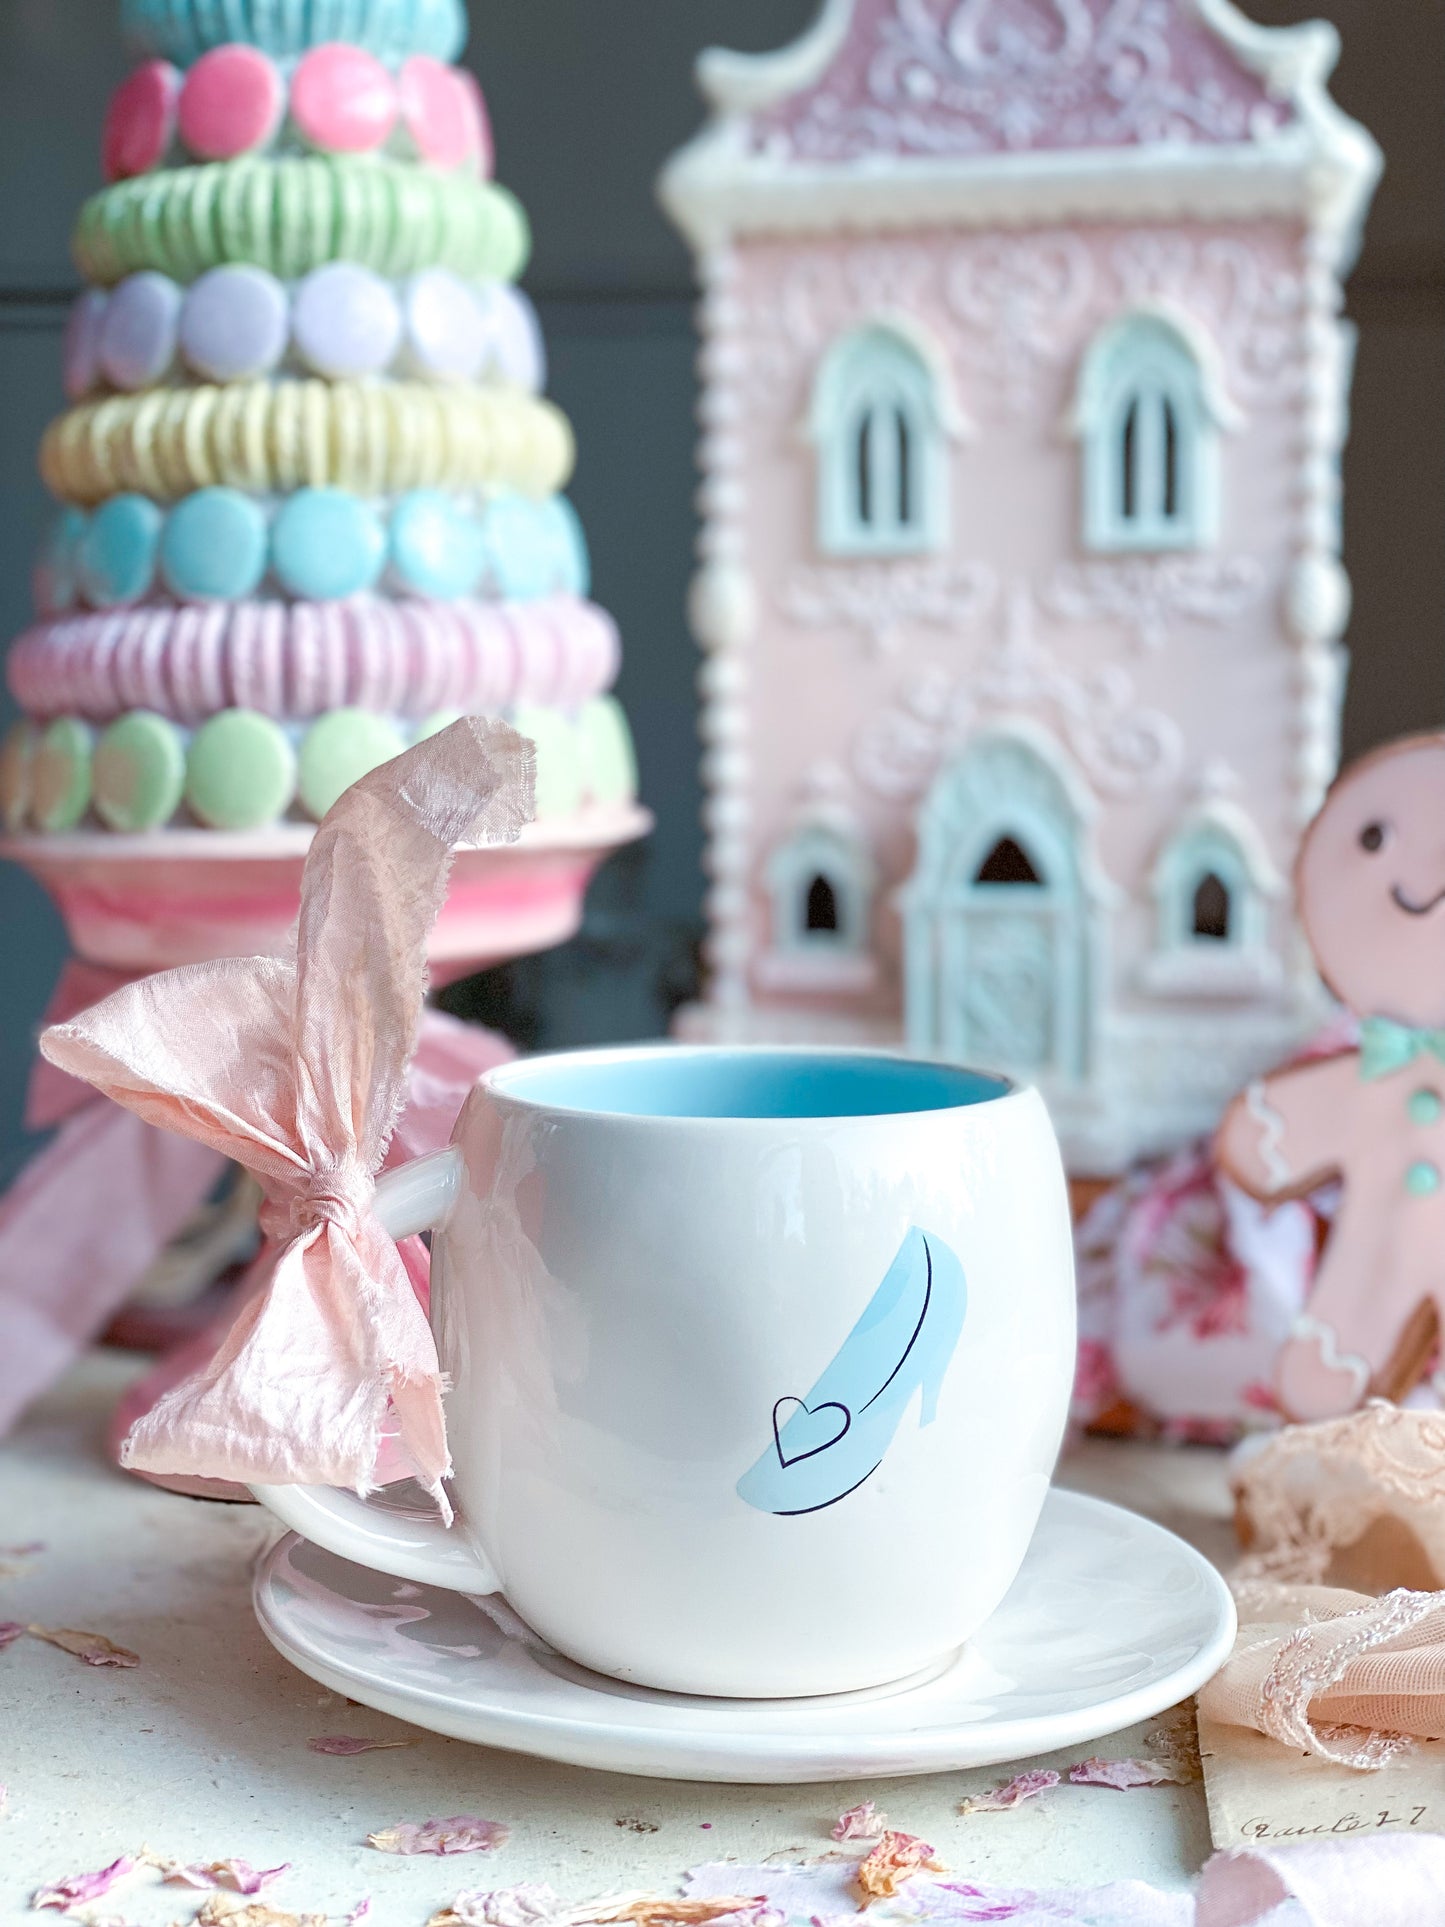 Disney’s Cinderella Princess Rae Dunn Teacup with glass slipper in pastel blue